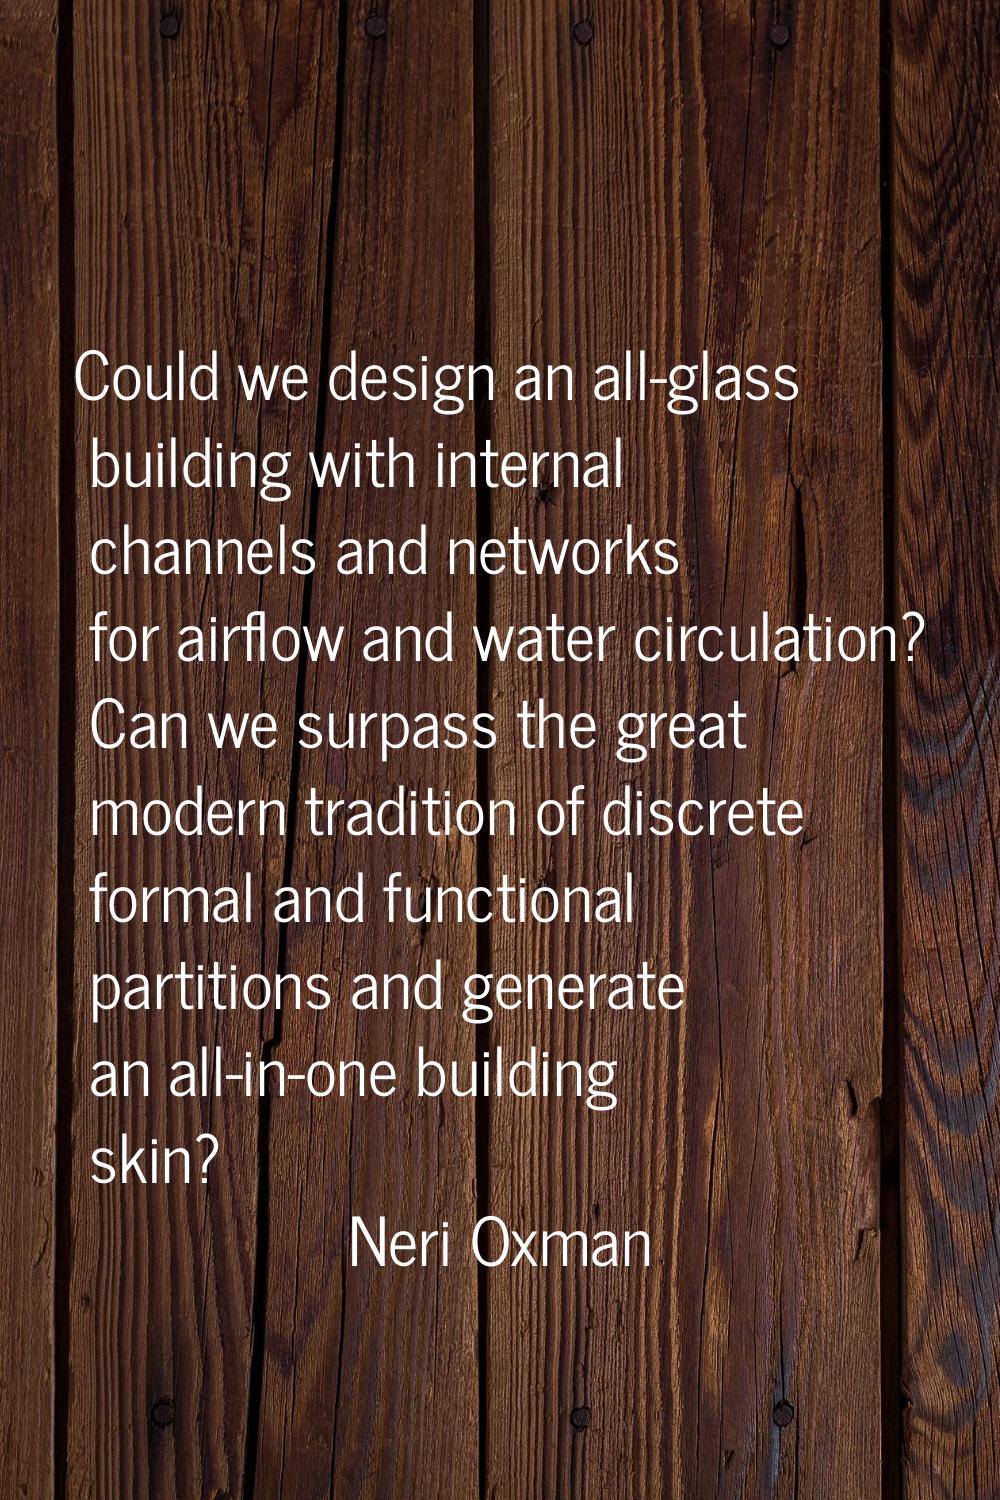 Could we design an all-glass building with internal channels and networks for airflow and water cir